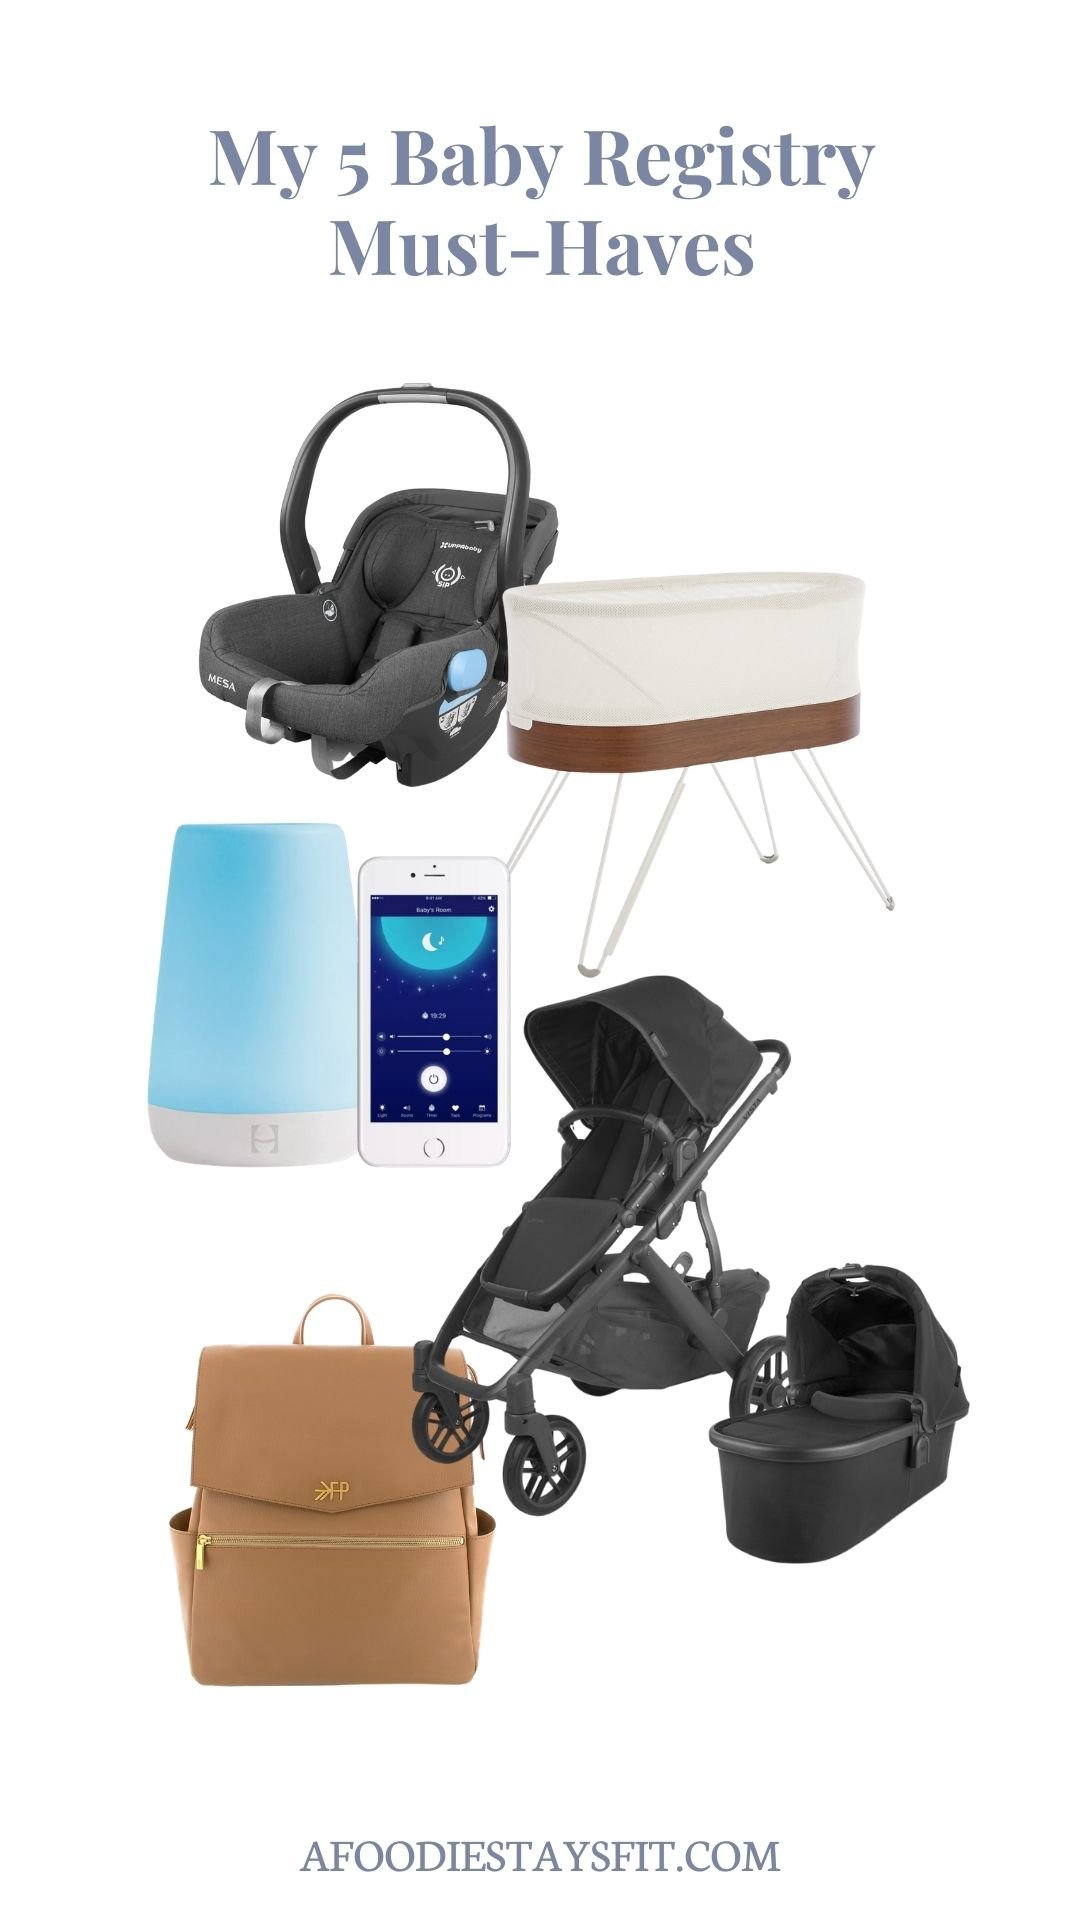 Our Baby Registry Must Haves